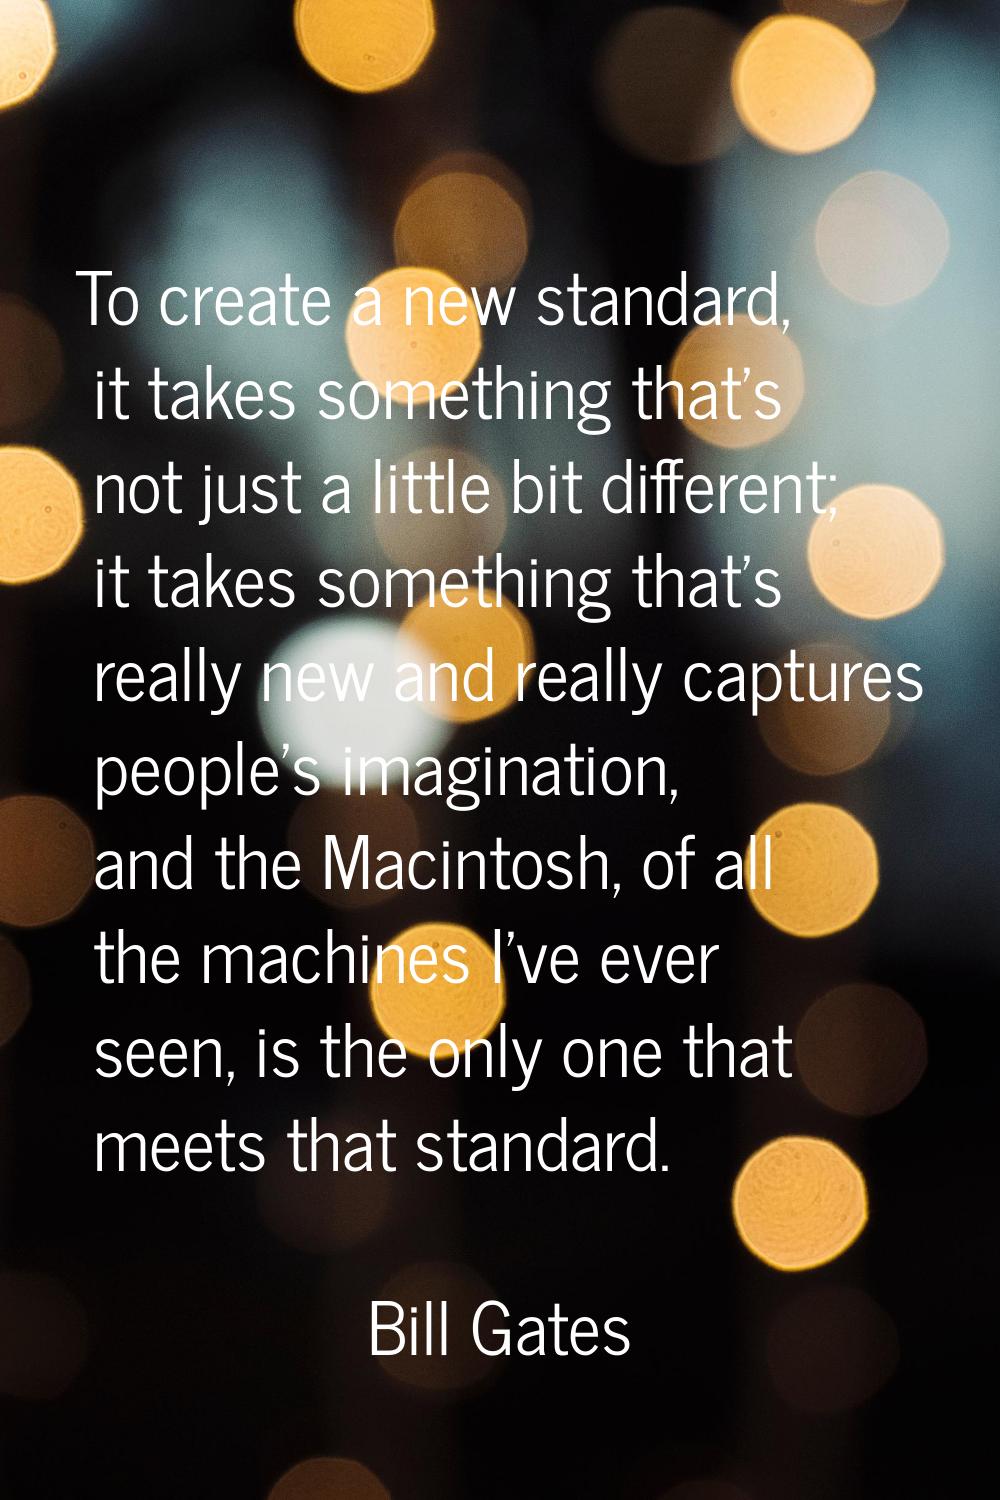 To create a new standard, it takes something that's not just a little bit different; it takes somet